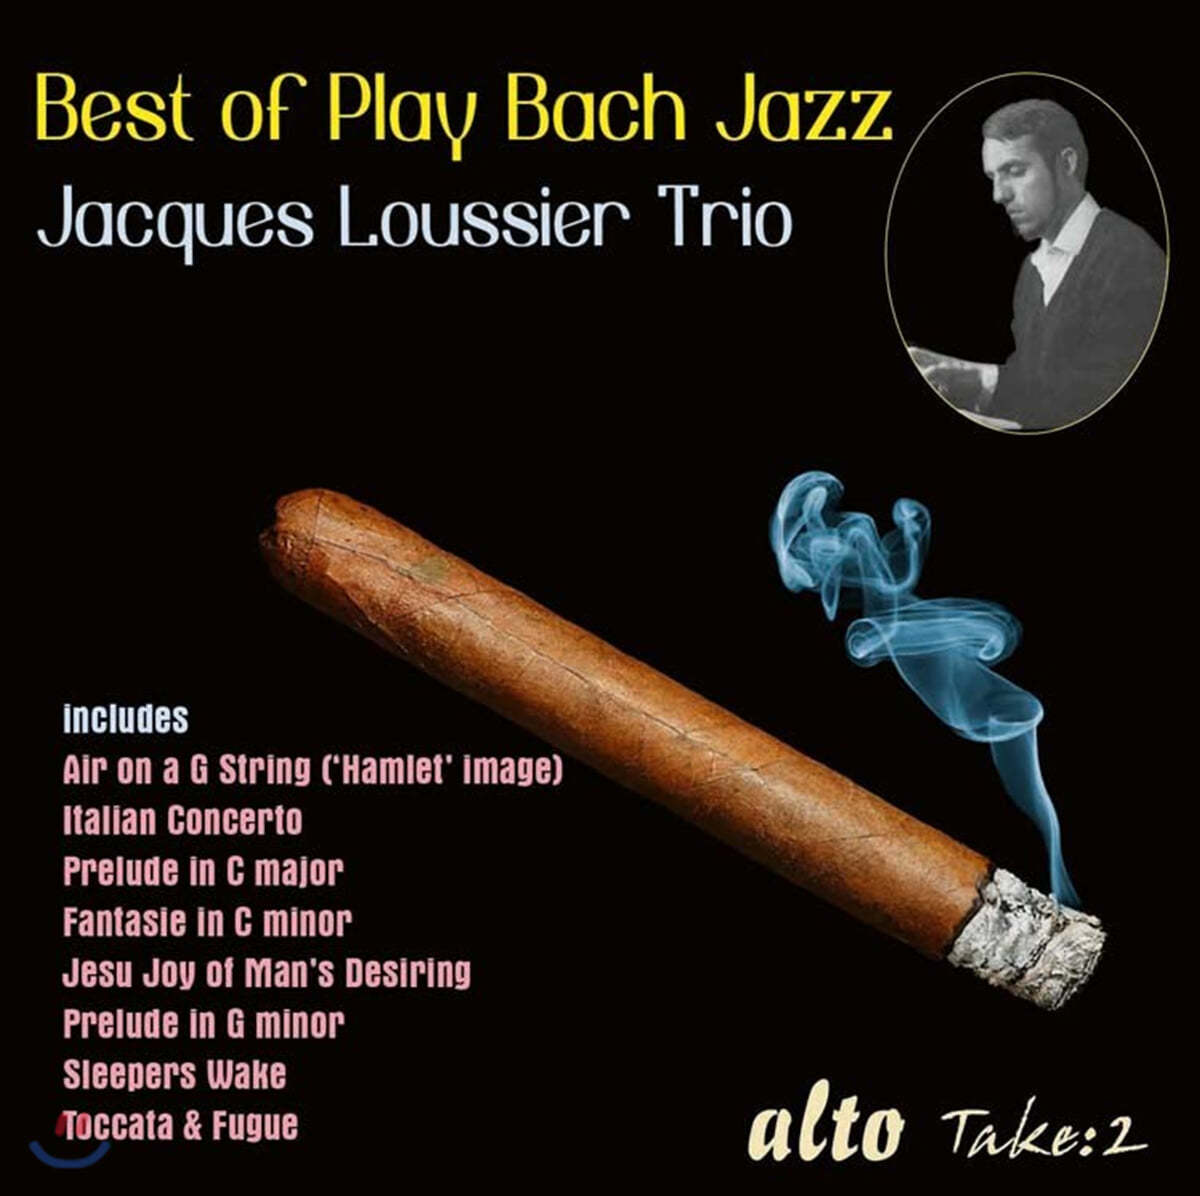 Jacques Loussier Trio 재즈로 듣는 바흐 (Best of Play Bach Jazz)